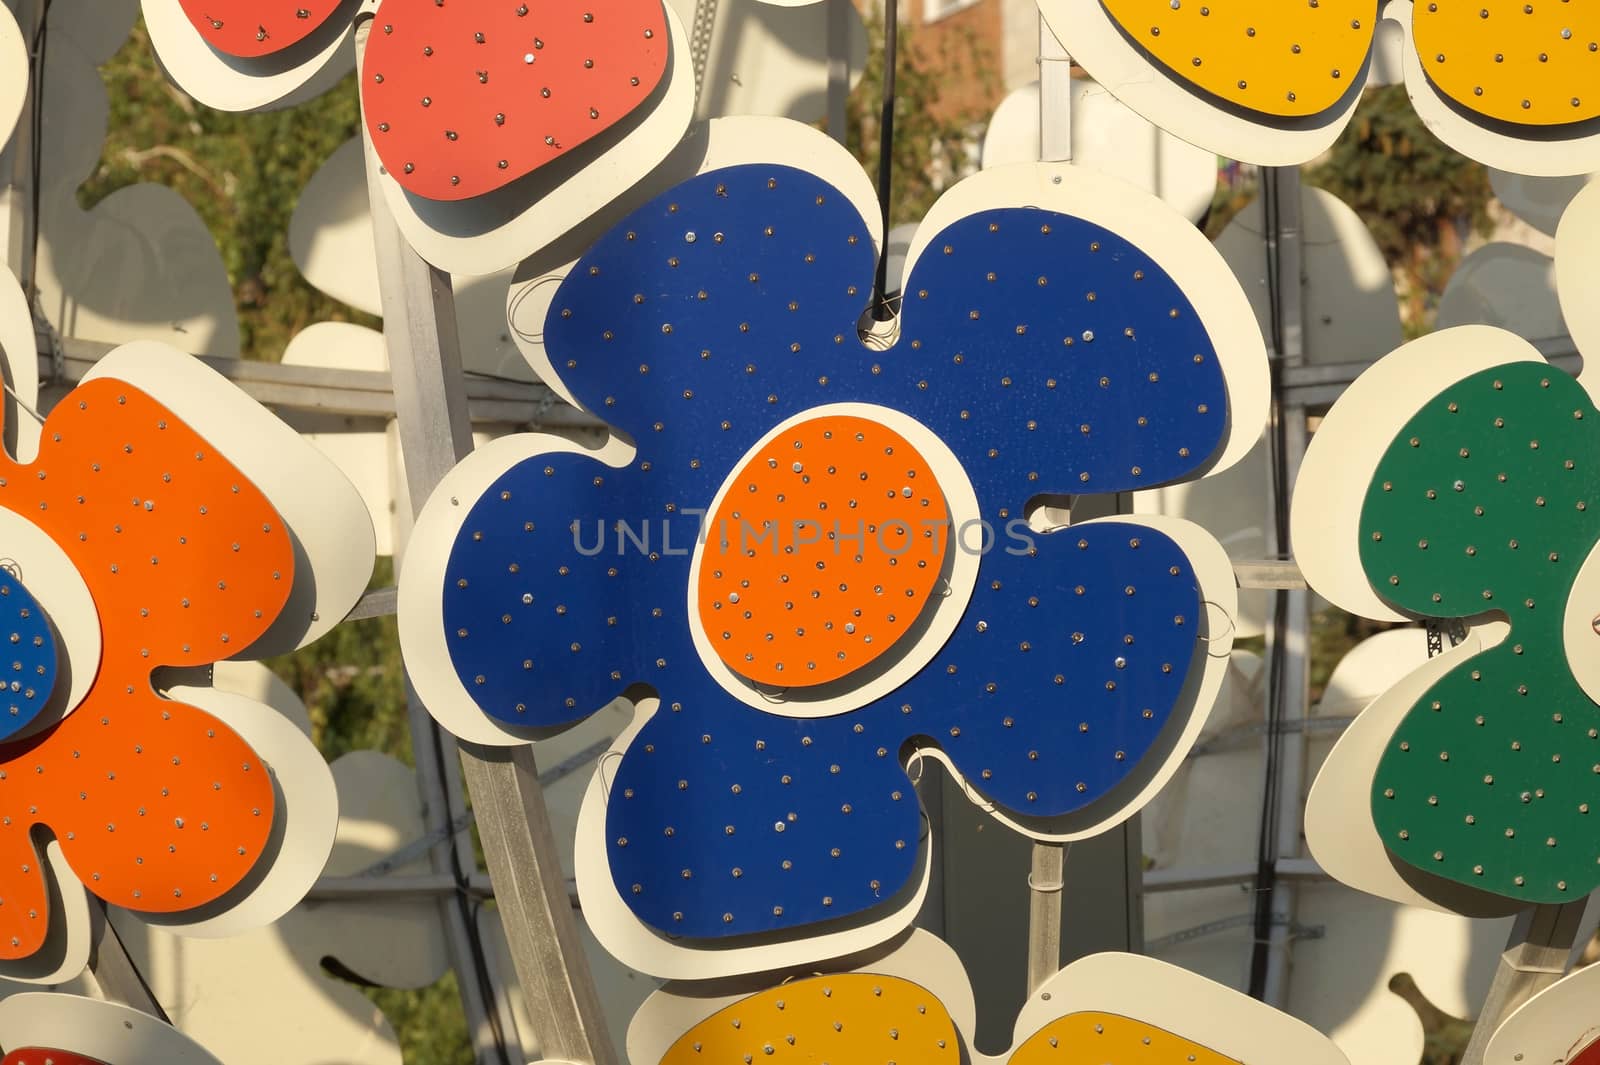 Design "Flowers" on the street in the city of Volgograd